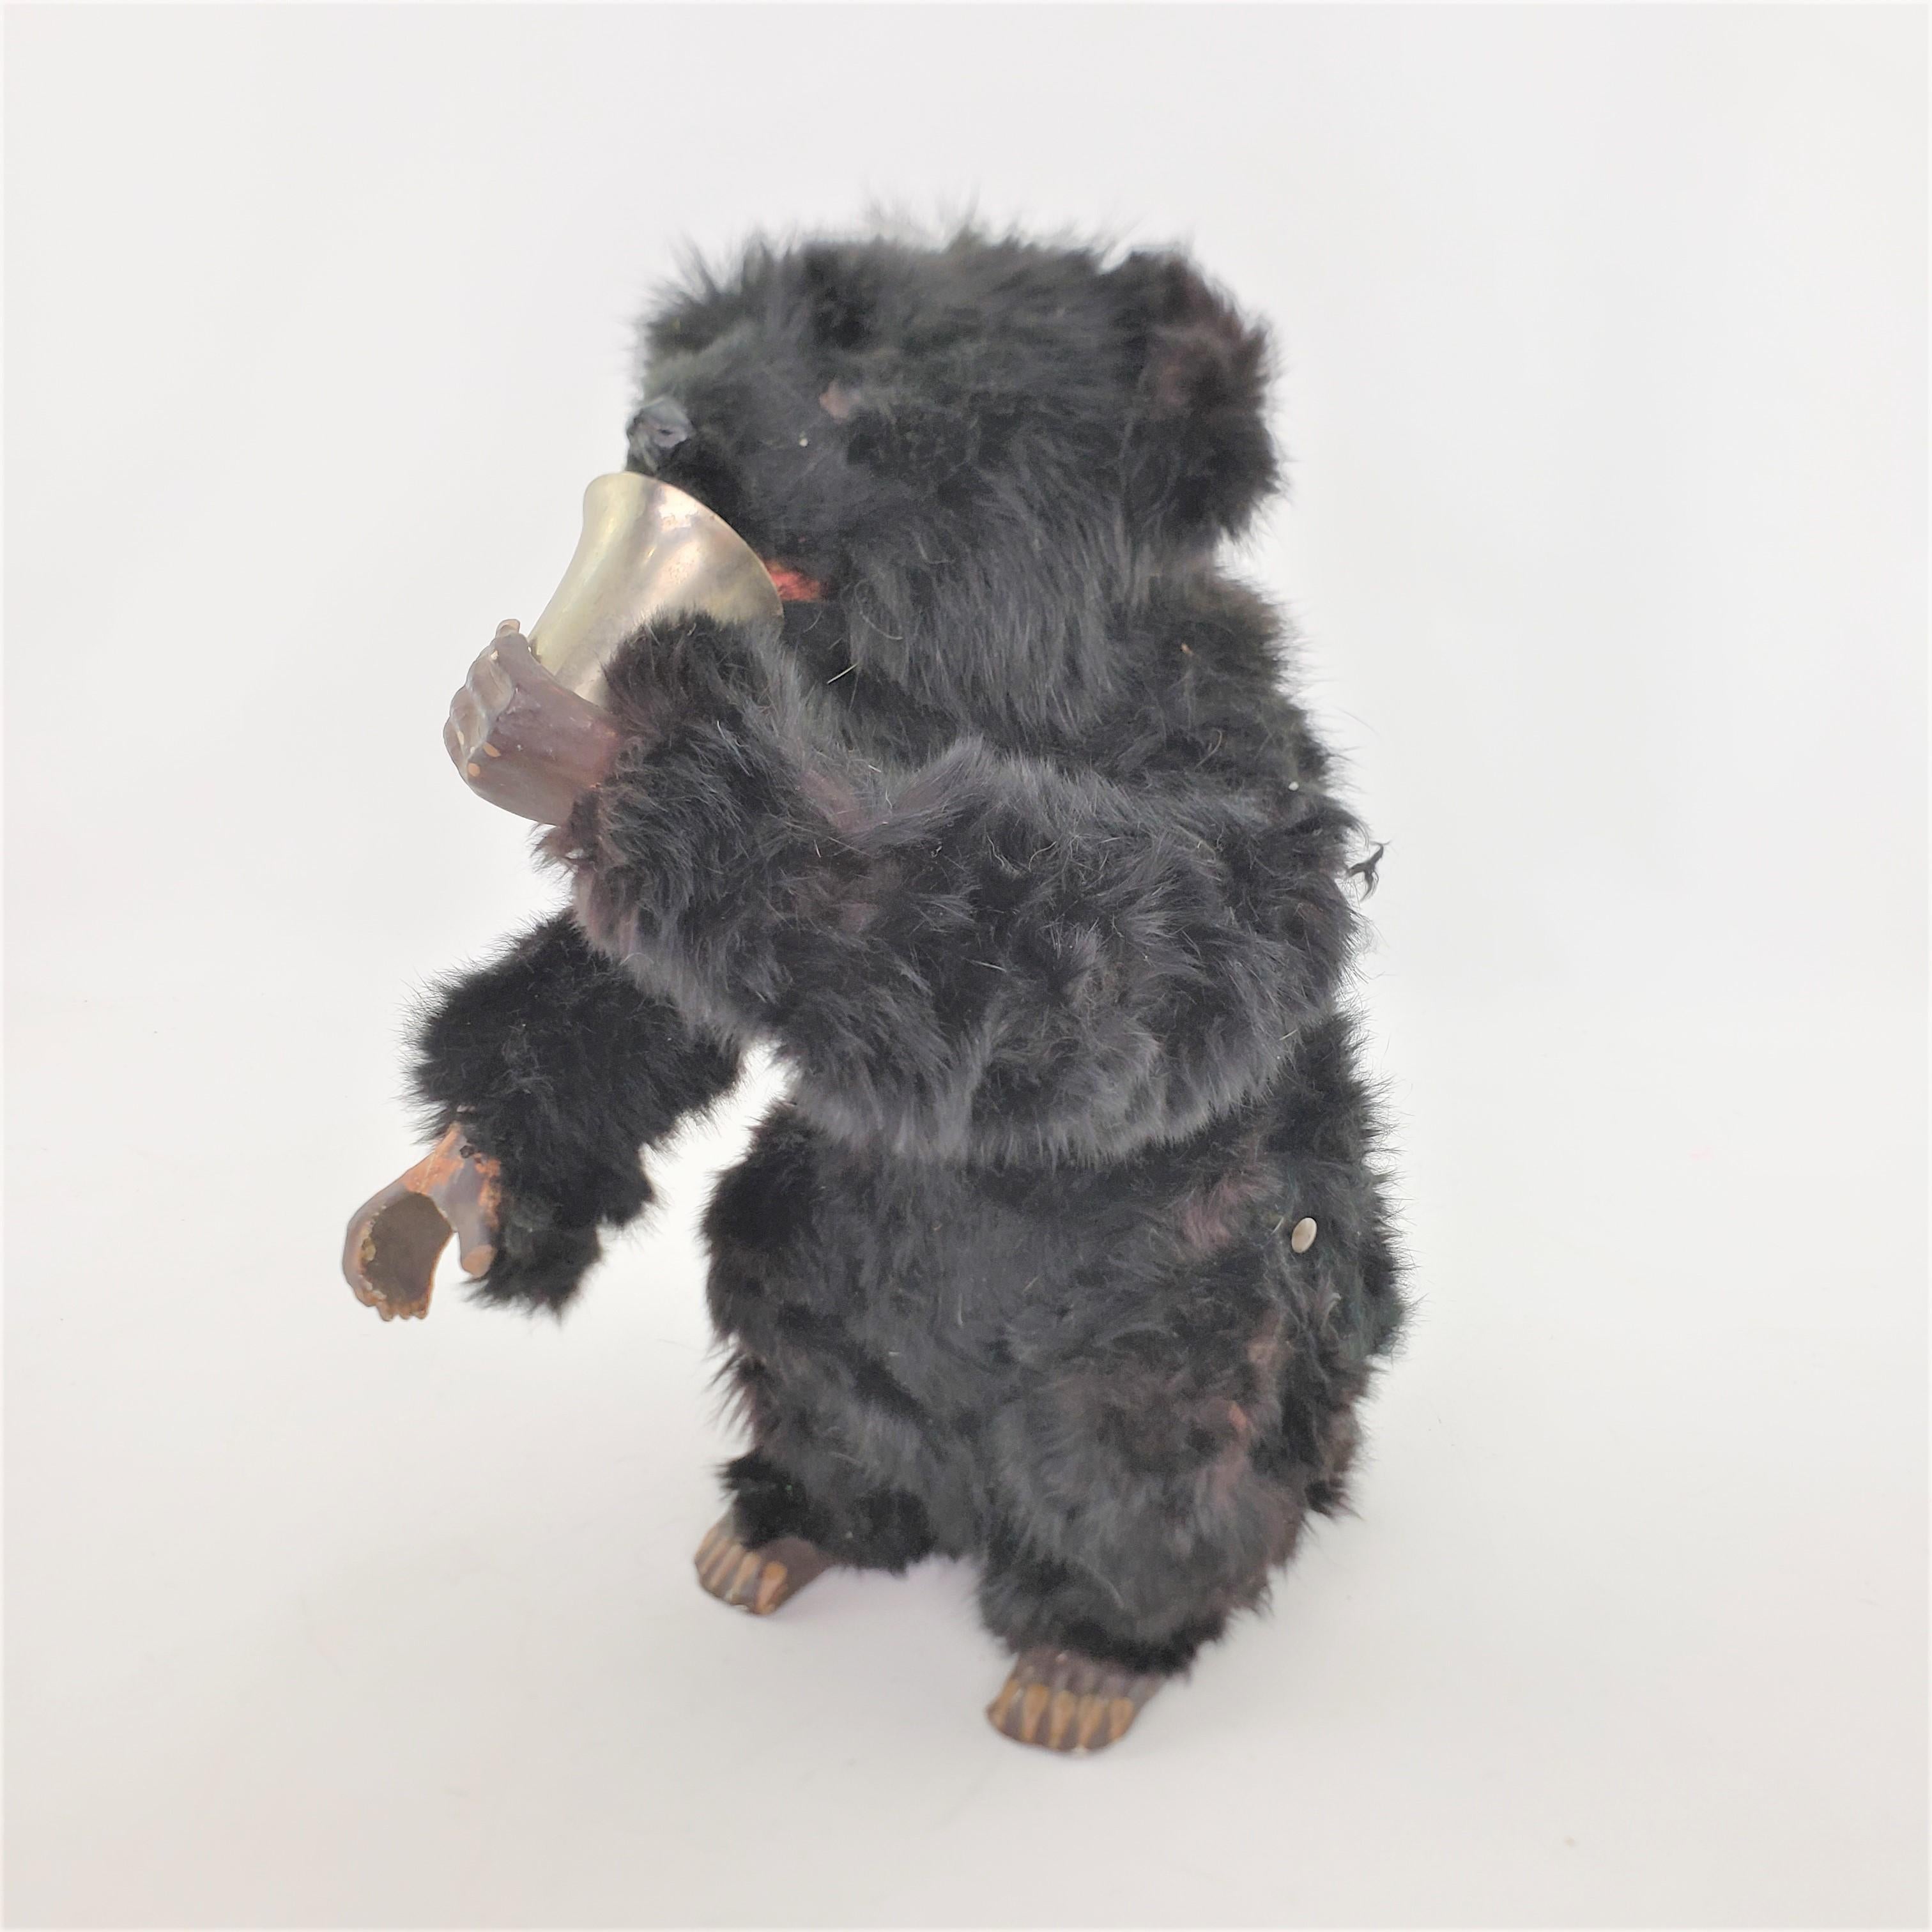 This antique mechanical toy is unsigned, but presumed to have been made in Europe, possibly England or Austria in approximately 1880 and done in the period Victorian style. This large toy is a black bear with articulated arms and mouth. The